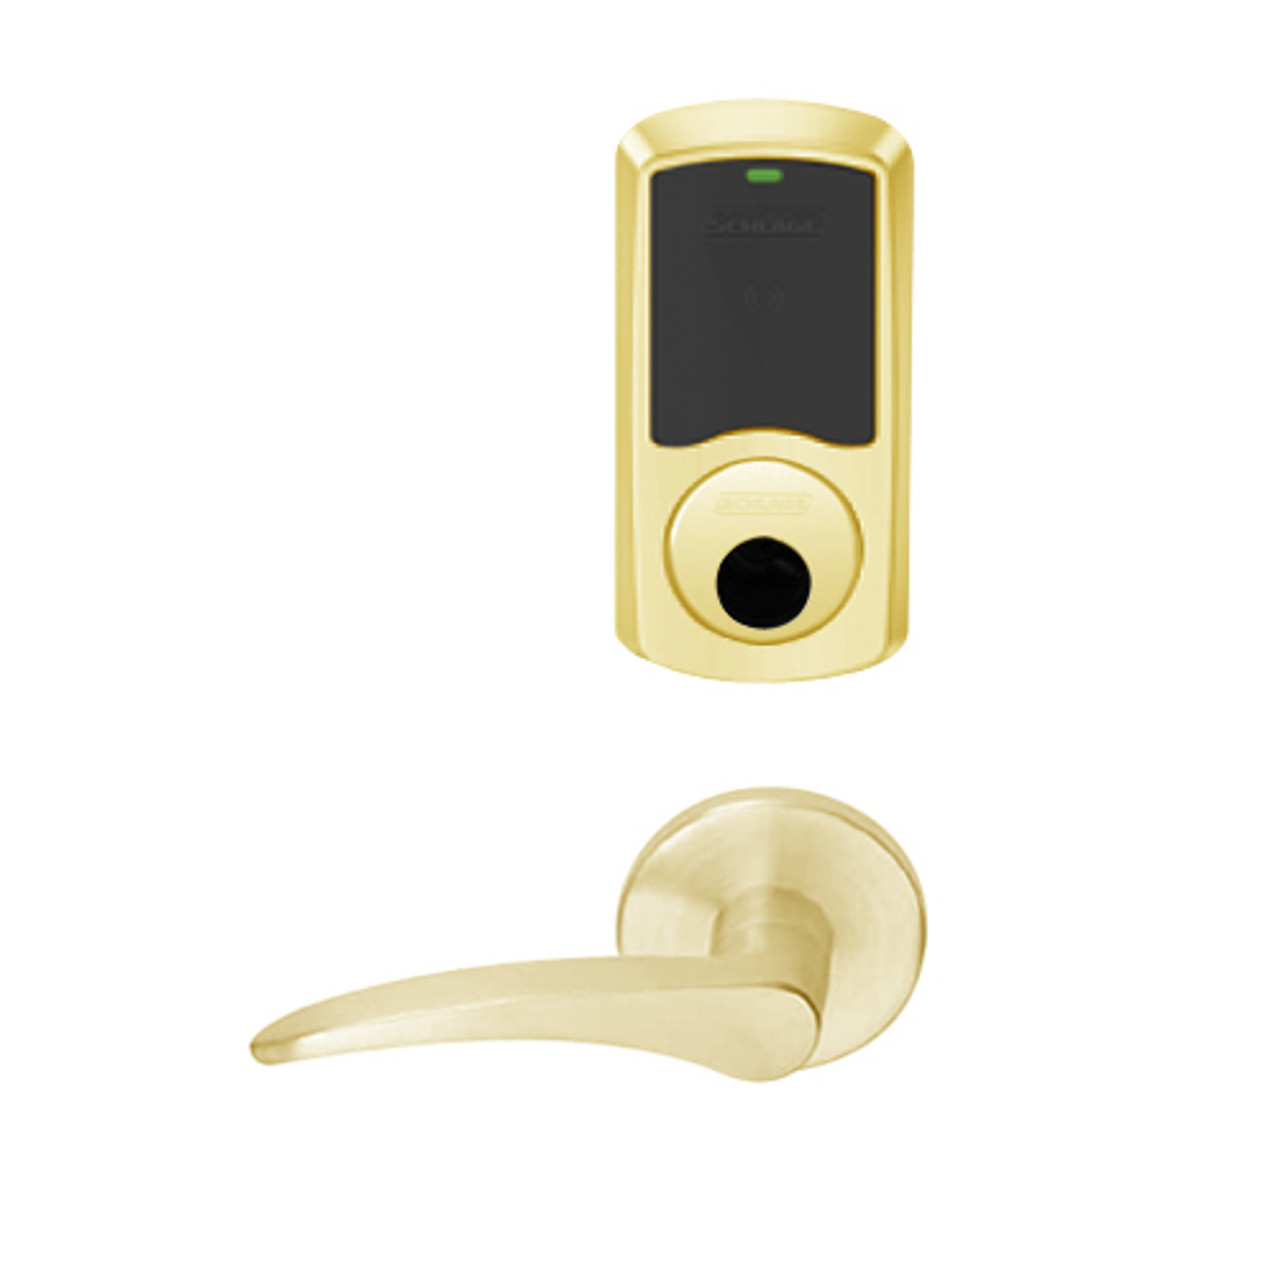 LEMB-GRW-L-12-605-00B-LH Schlage Less Cylinder Privacy/Office Wireless Greenwich Mortise Lock with Push Button & LED Indicator and 12 Lever in Bright Brass